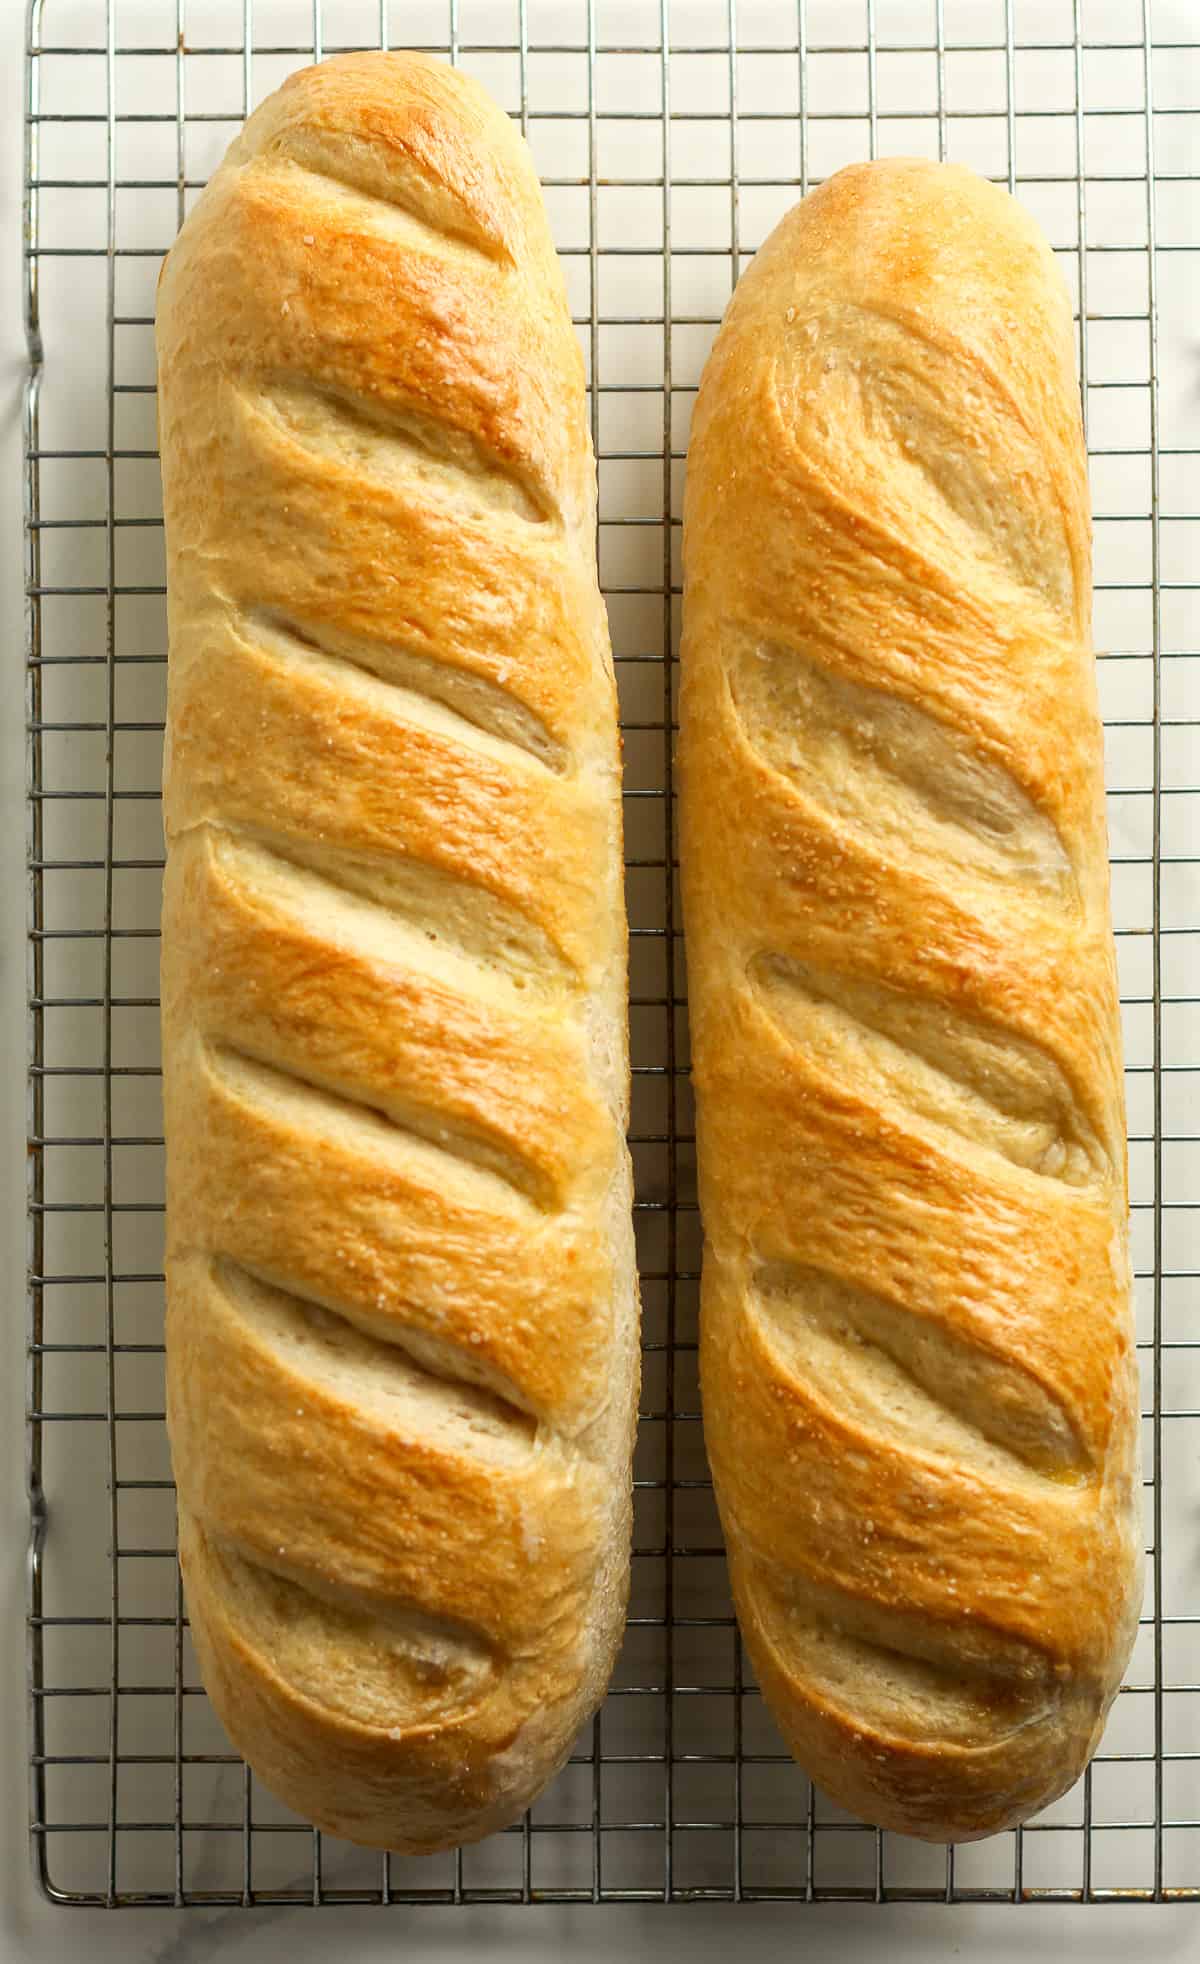 Two loaves of baked French bread.